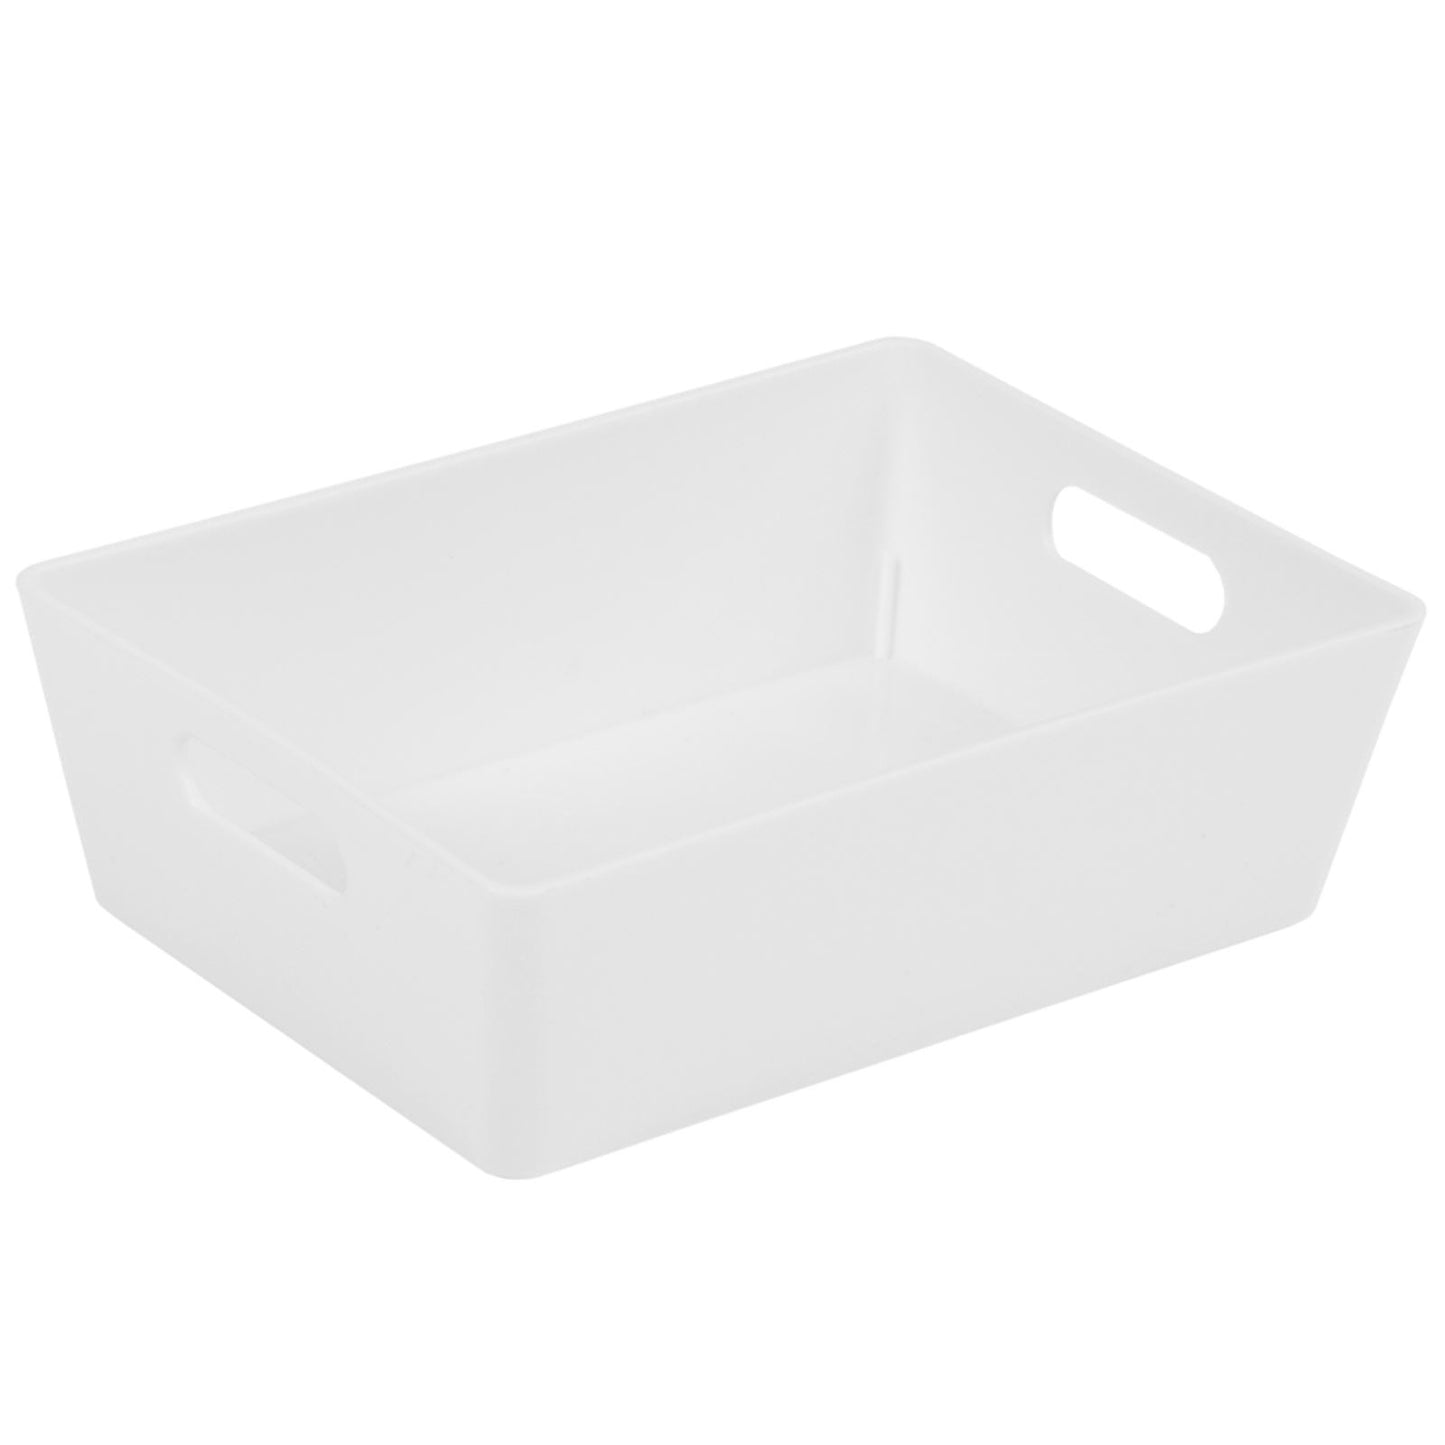 Keep Your Studio Organised with a Plastic Storage Basket